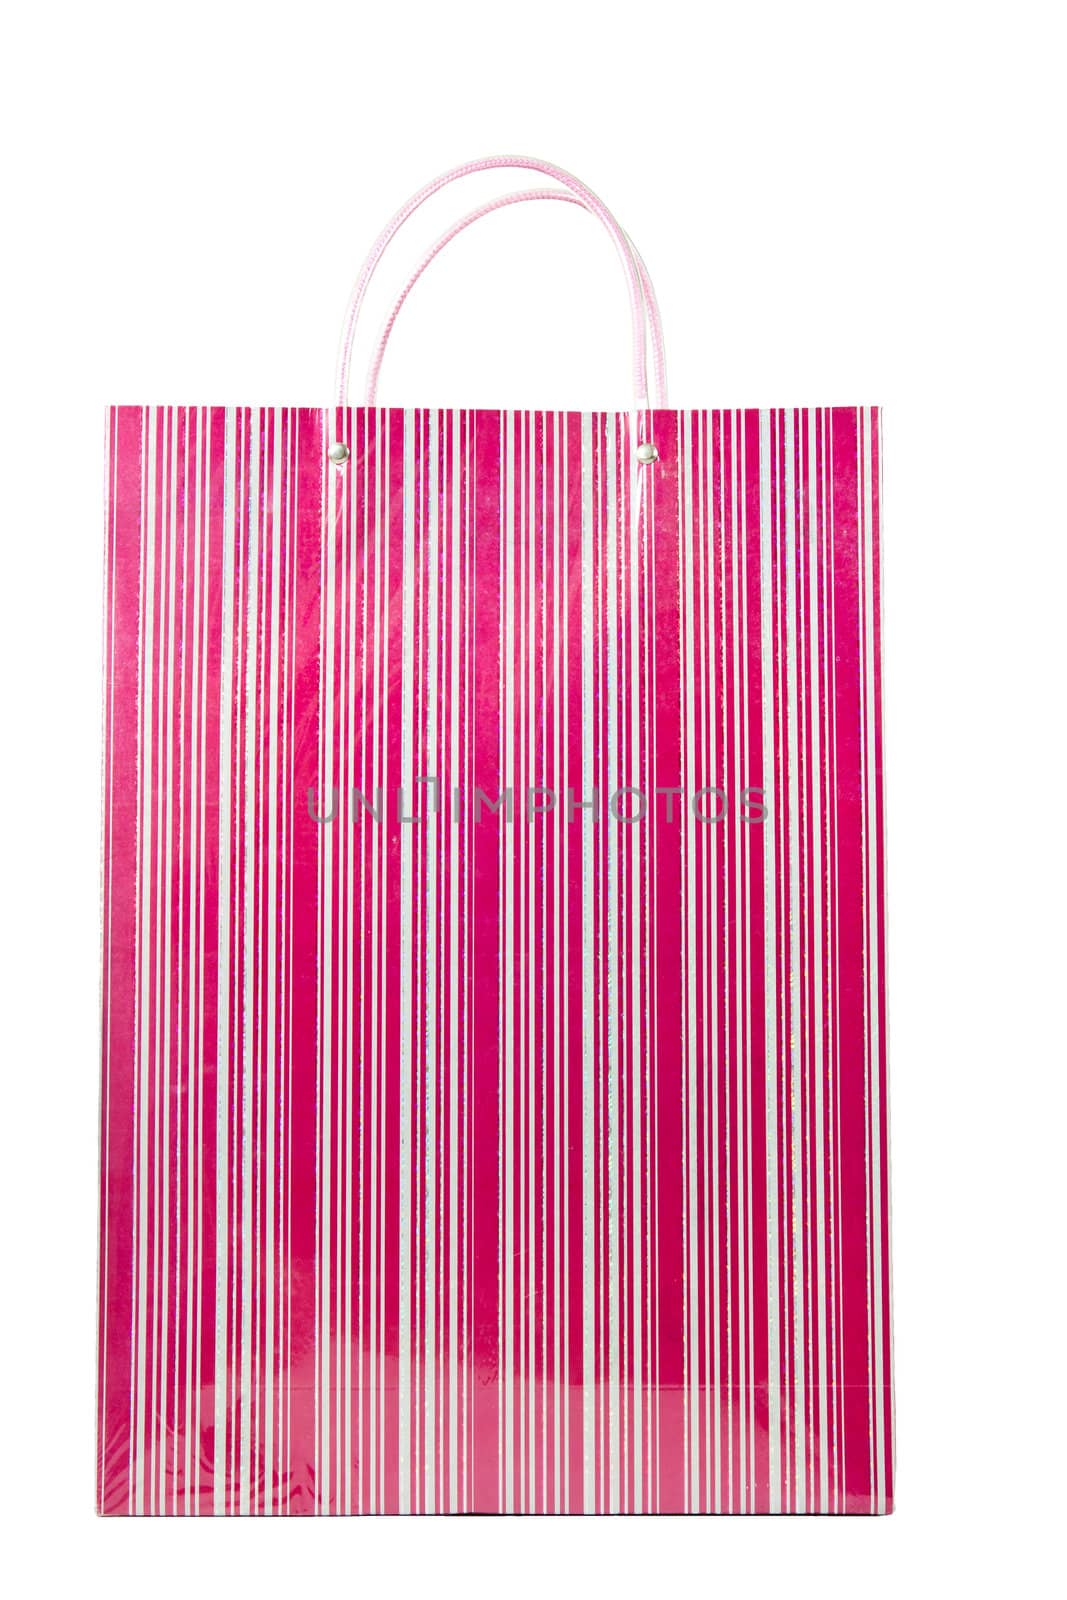 A fancy red striped shopping bag isolated over white.